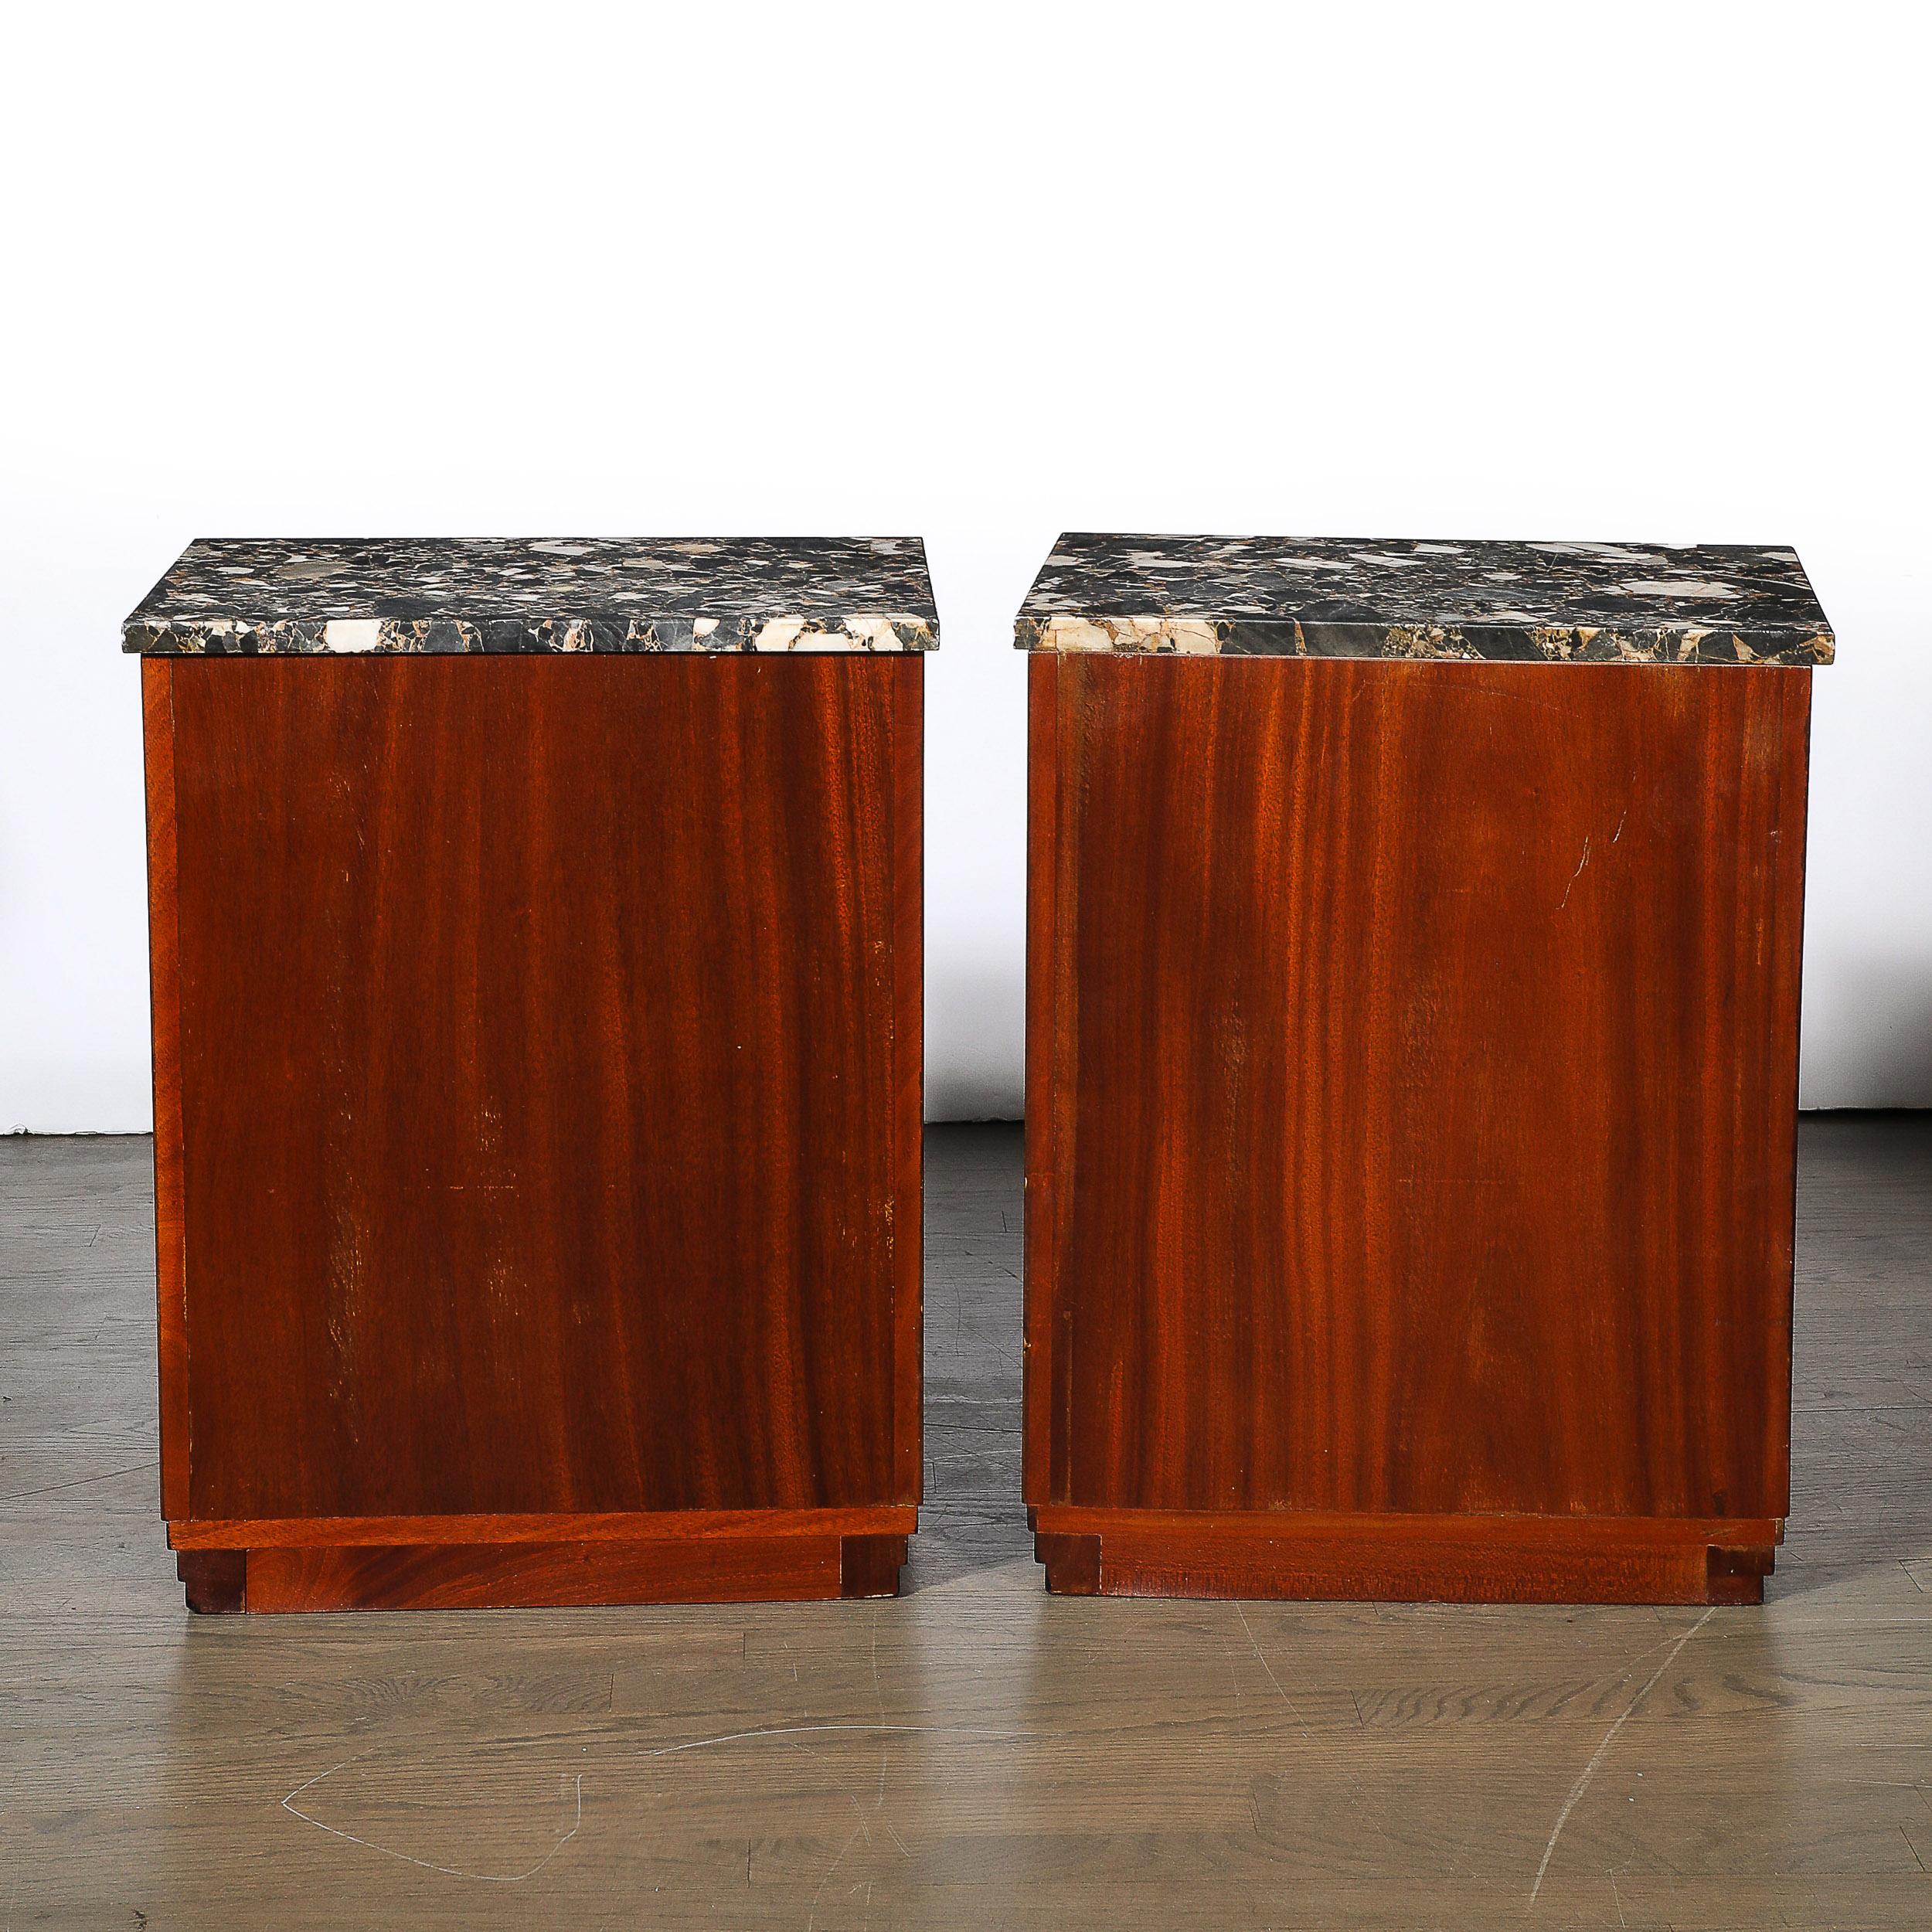 Pair of Art Deco Marble Top Book-matched Walnut & Burled Carpathian Nightstands For Sale 5